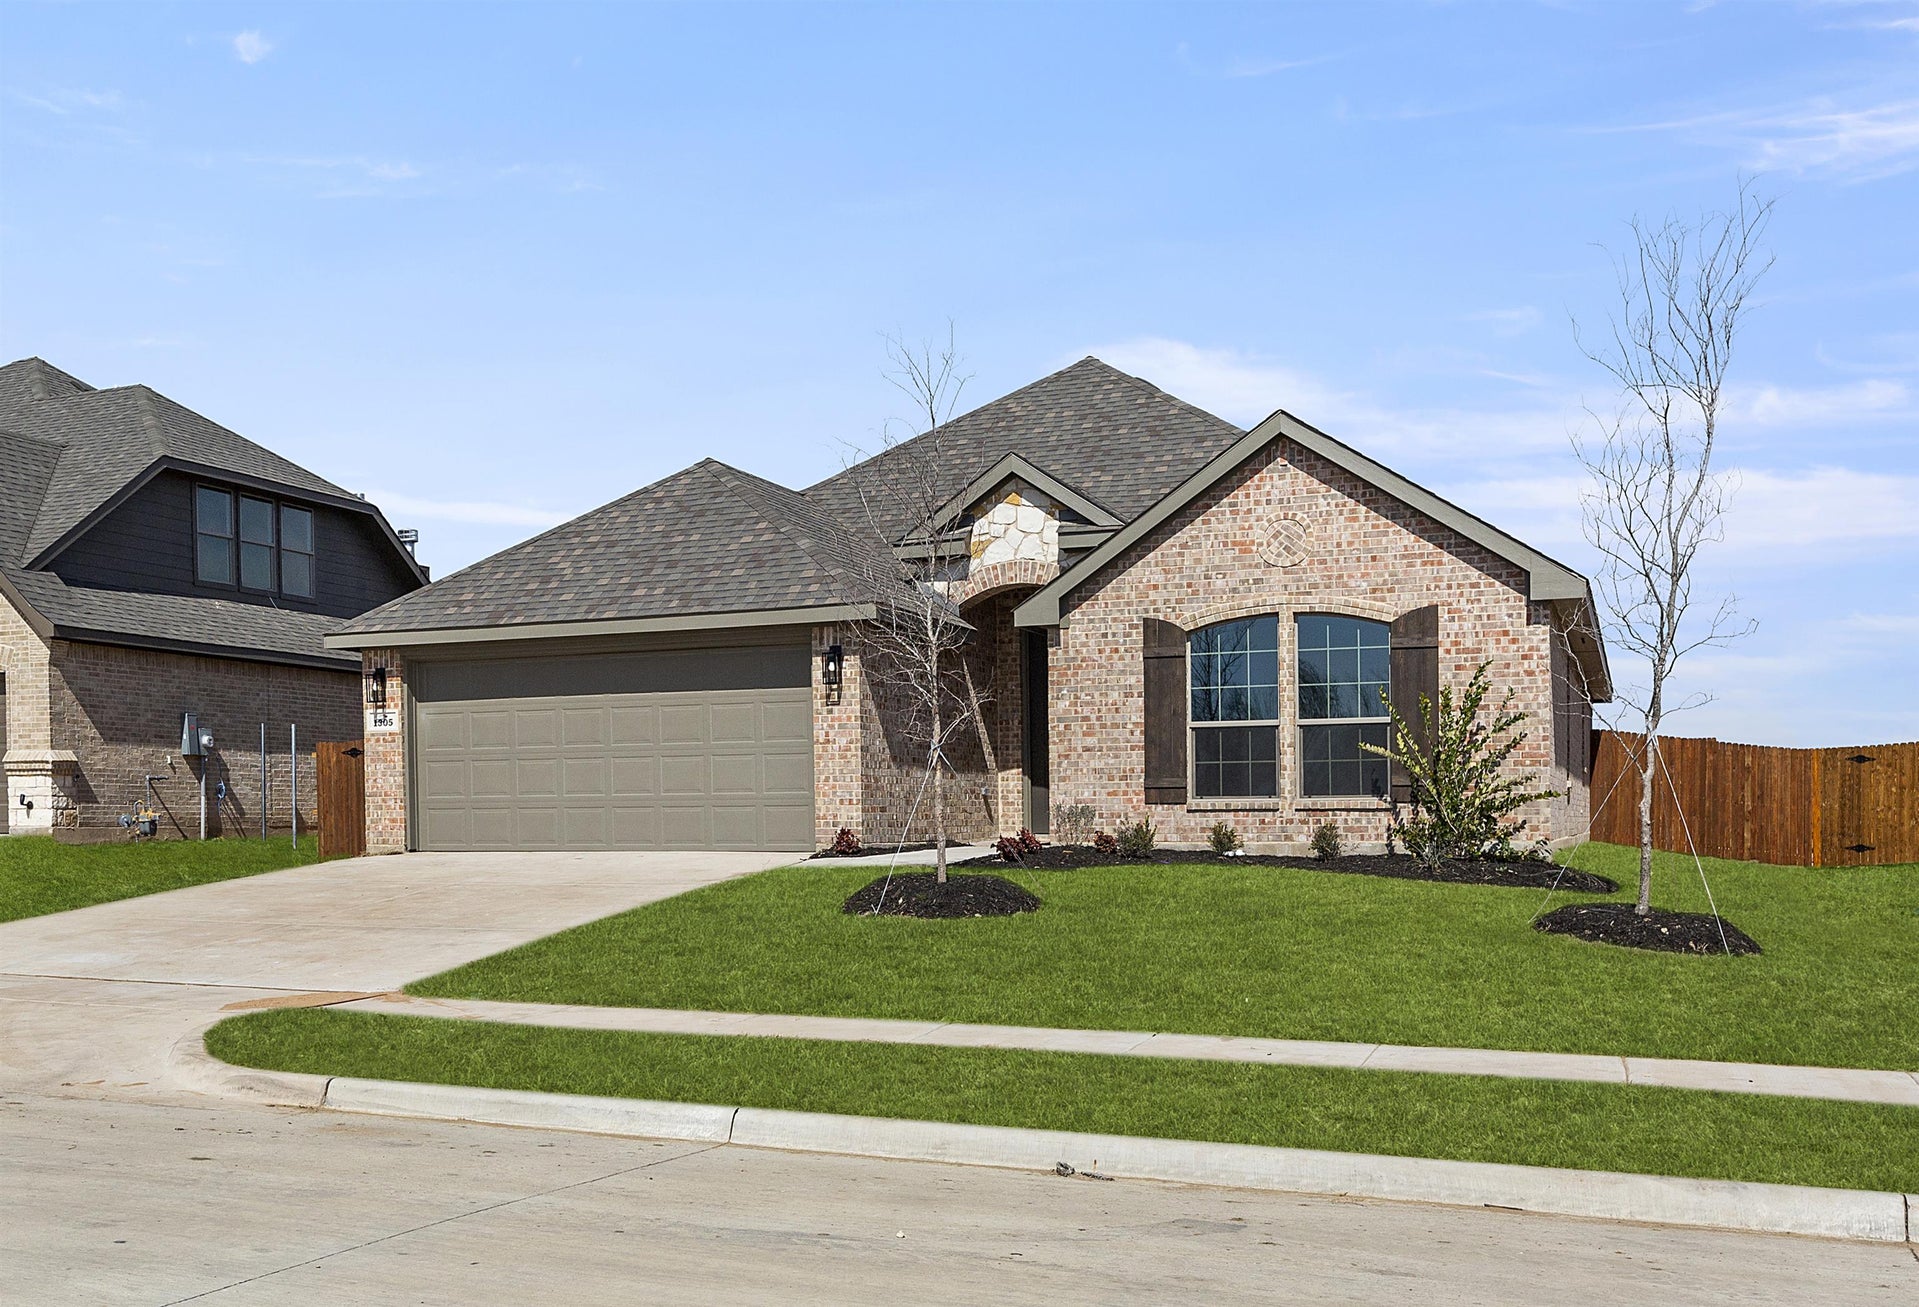 1,753sf New Home in Crowley, TX